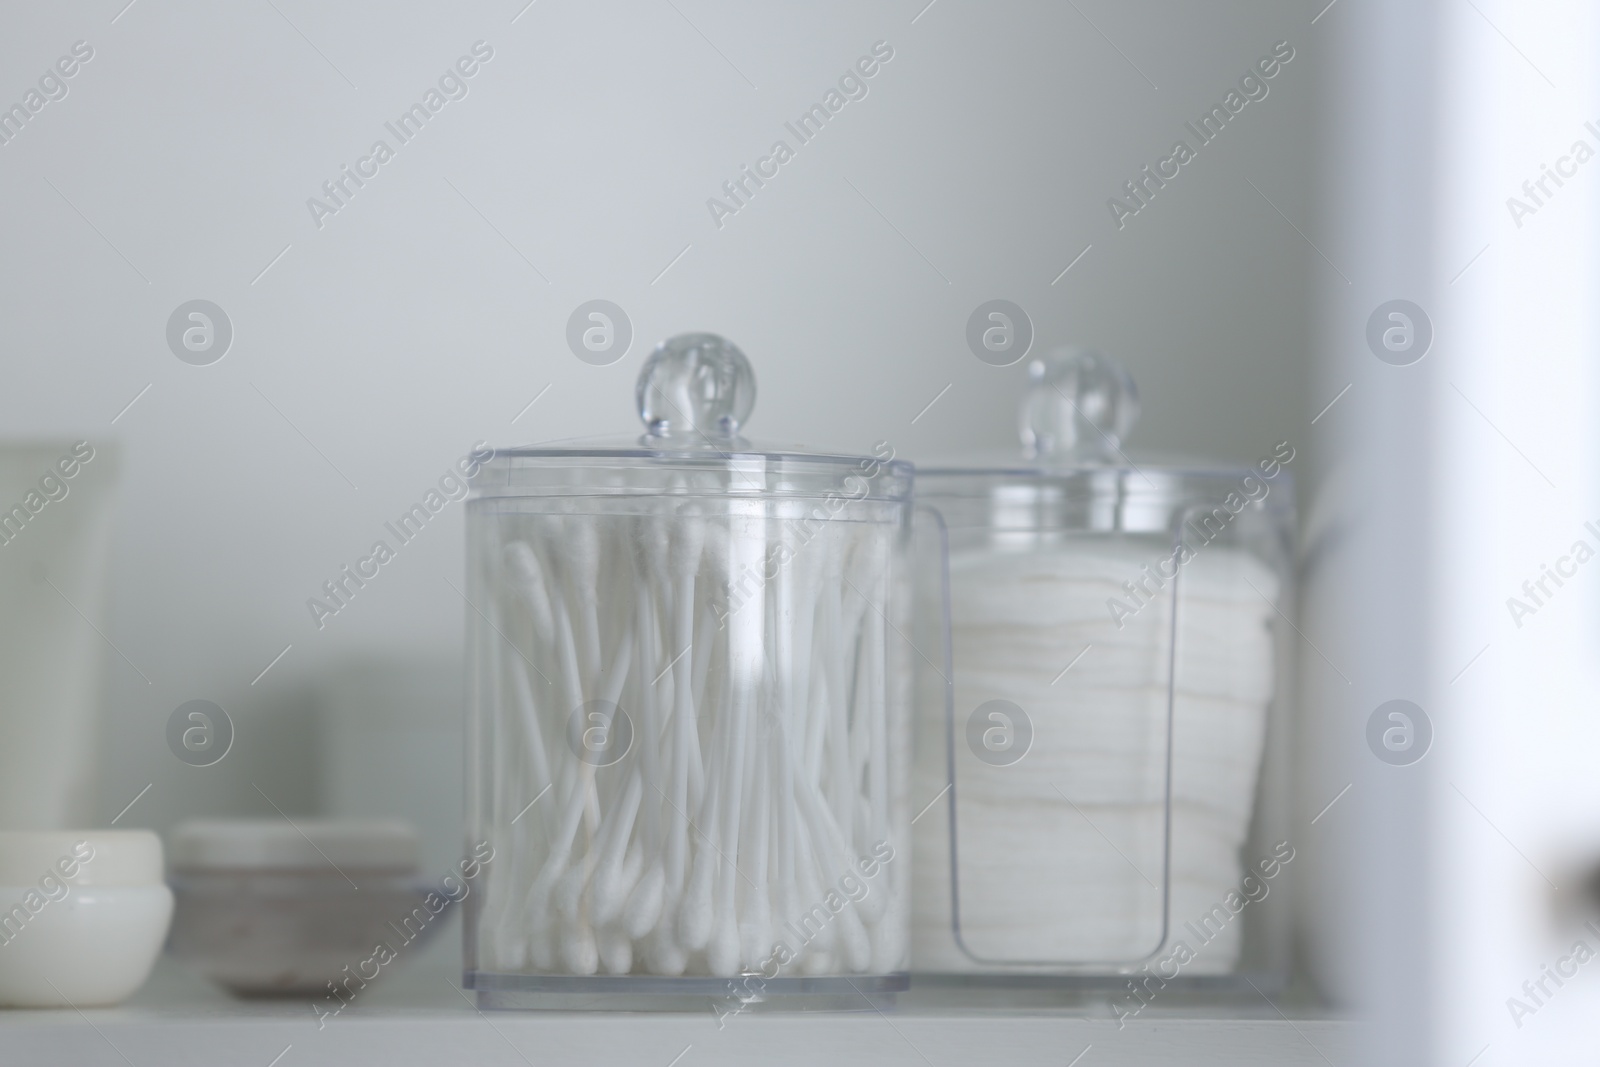 Photo of Cotton buds and pads in transparent holders on shelf, closeup